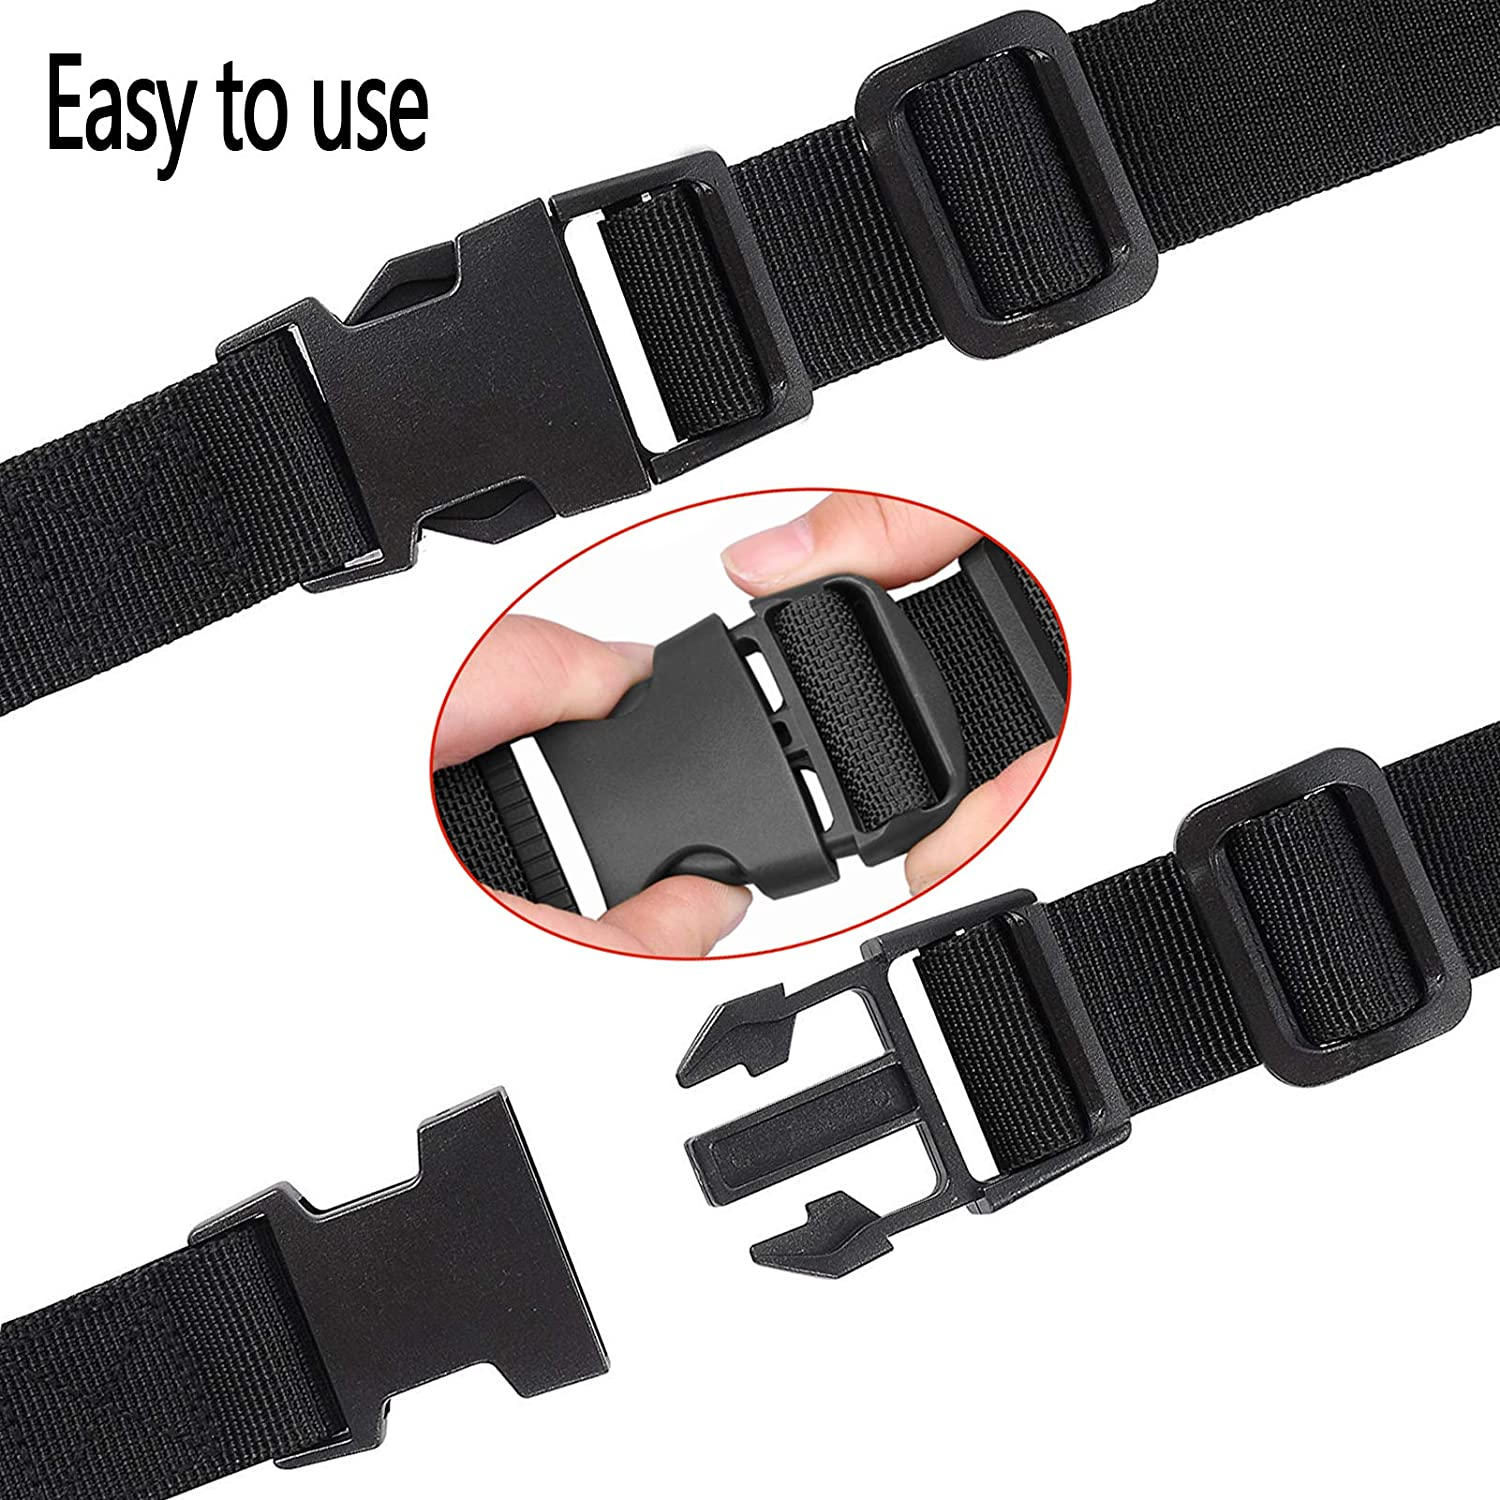 Premium Utility Straps with Quick Release Buckle Adjustable Short Nylon Lashing Straps for Backpack Tactical Lashings Camping Gear Sleeping Bag Mattress and More(Black 4Pcs/6.5Ft)